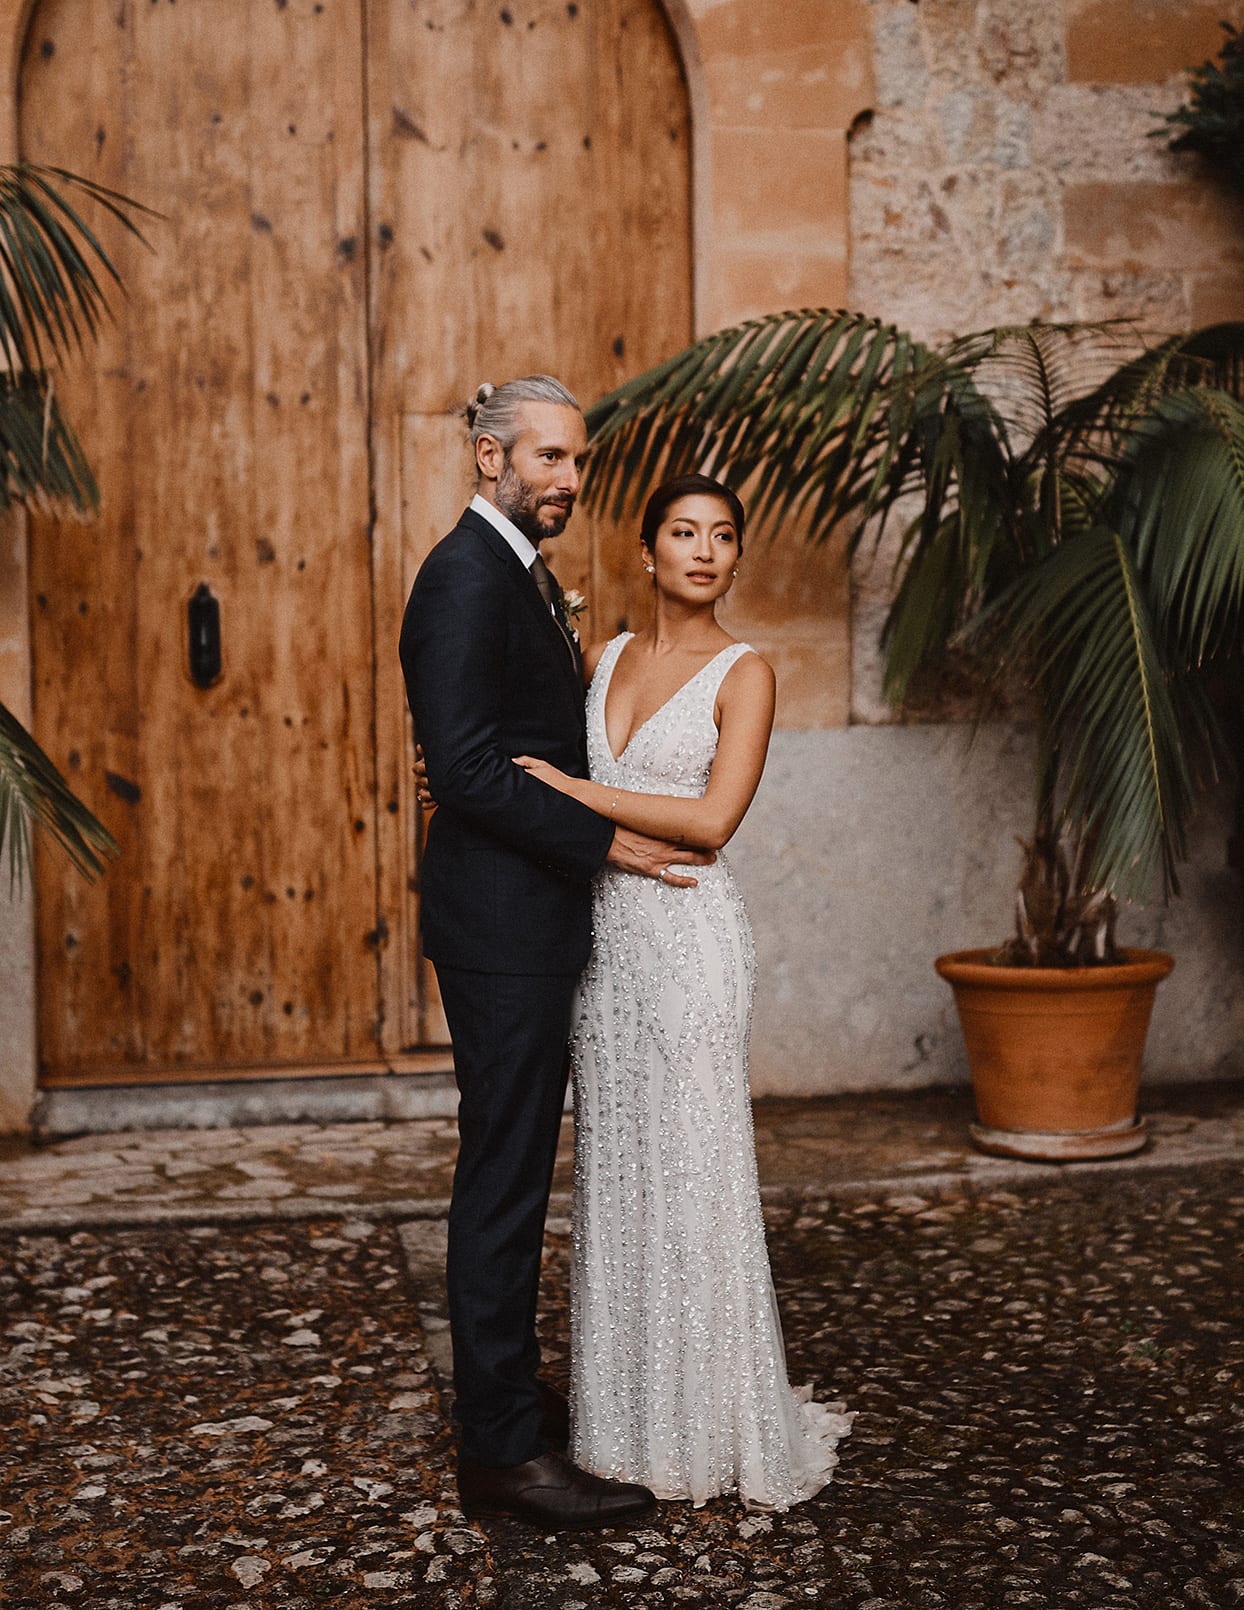 A Stylish, Secluded Wedding at a 128-Year-Old Finca in Mallorca, Spain